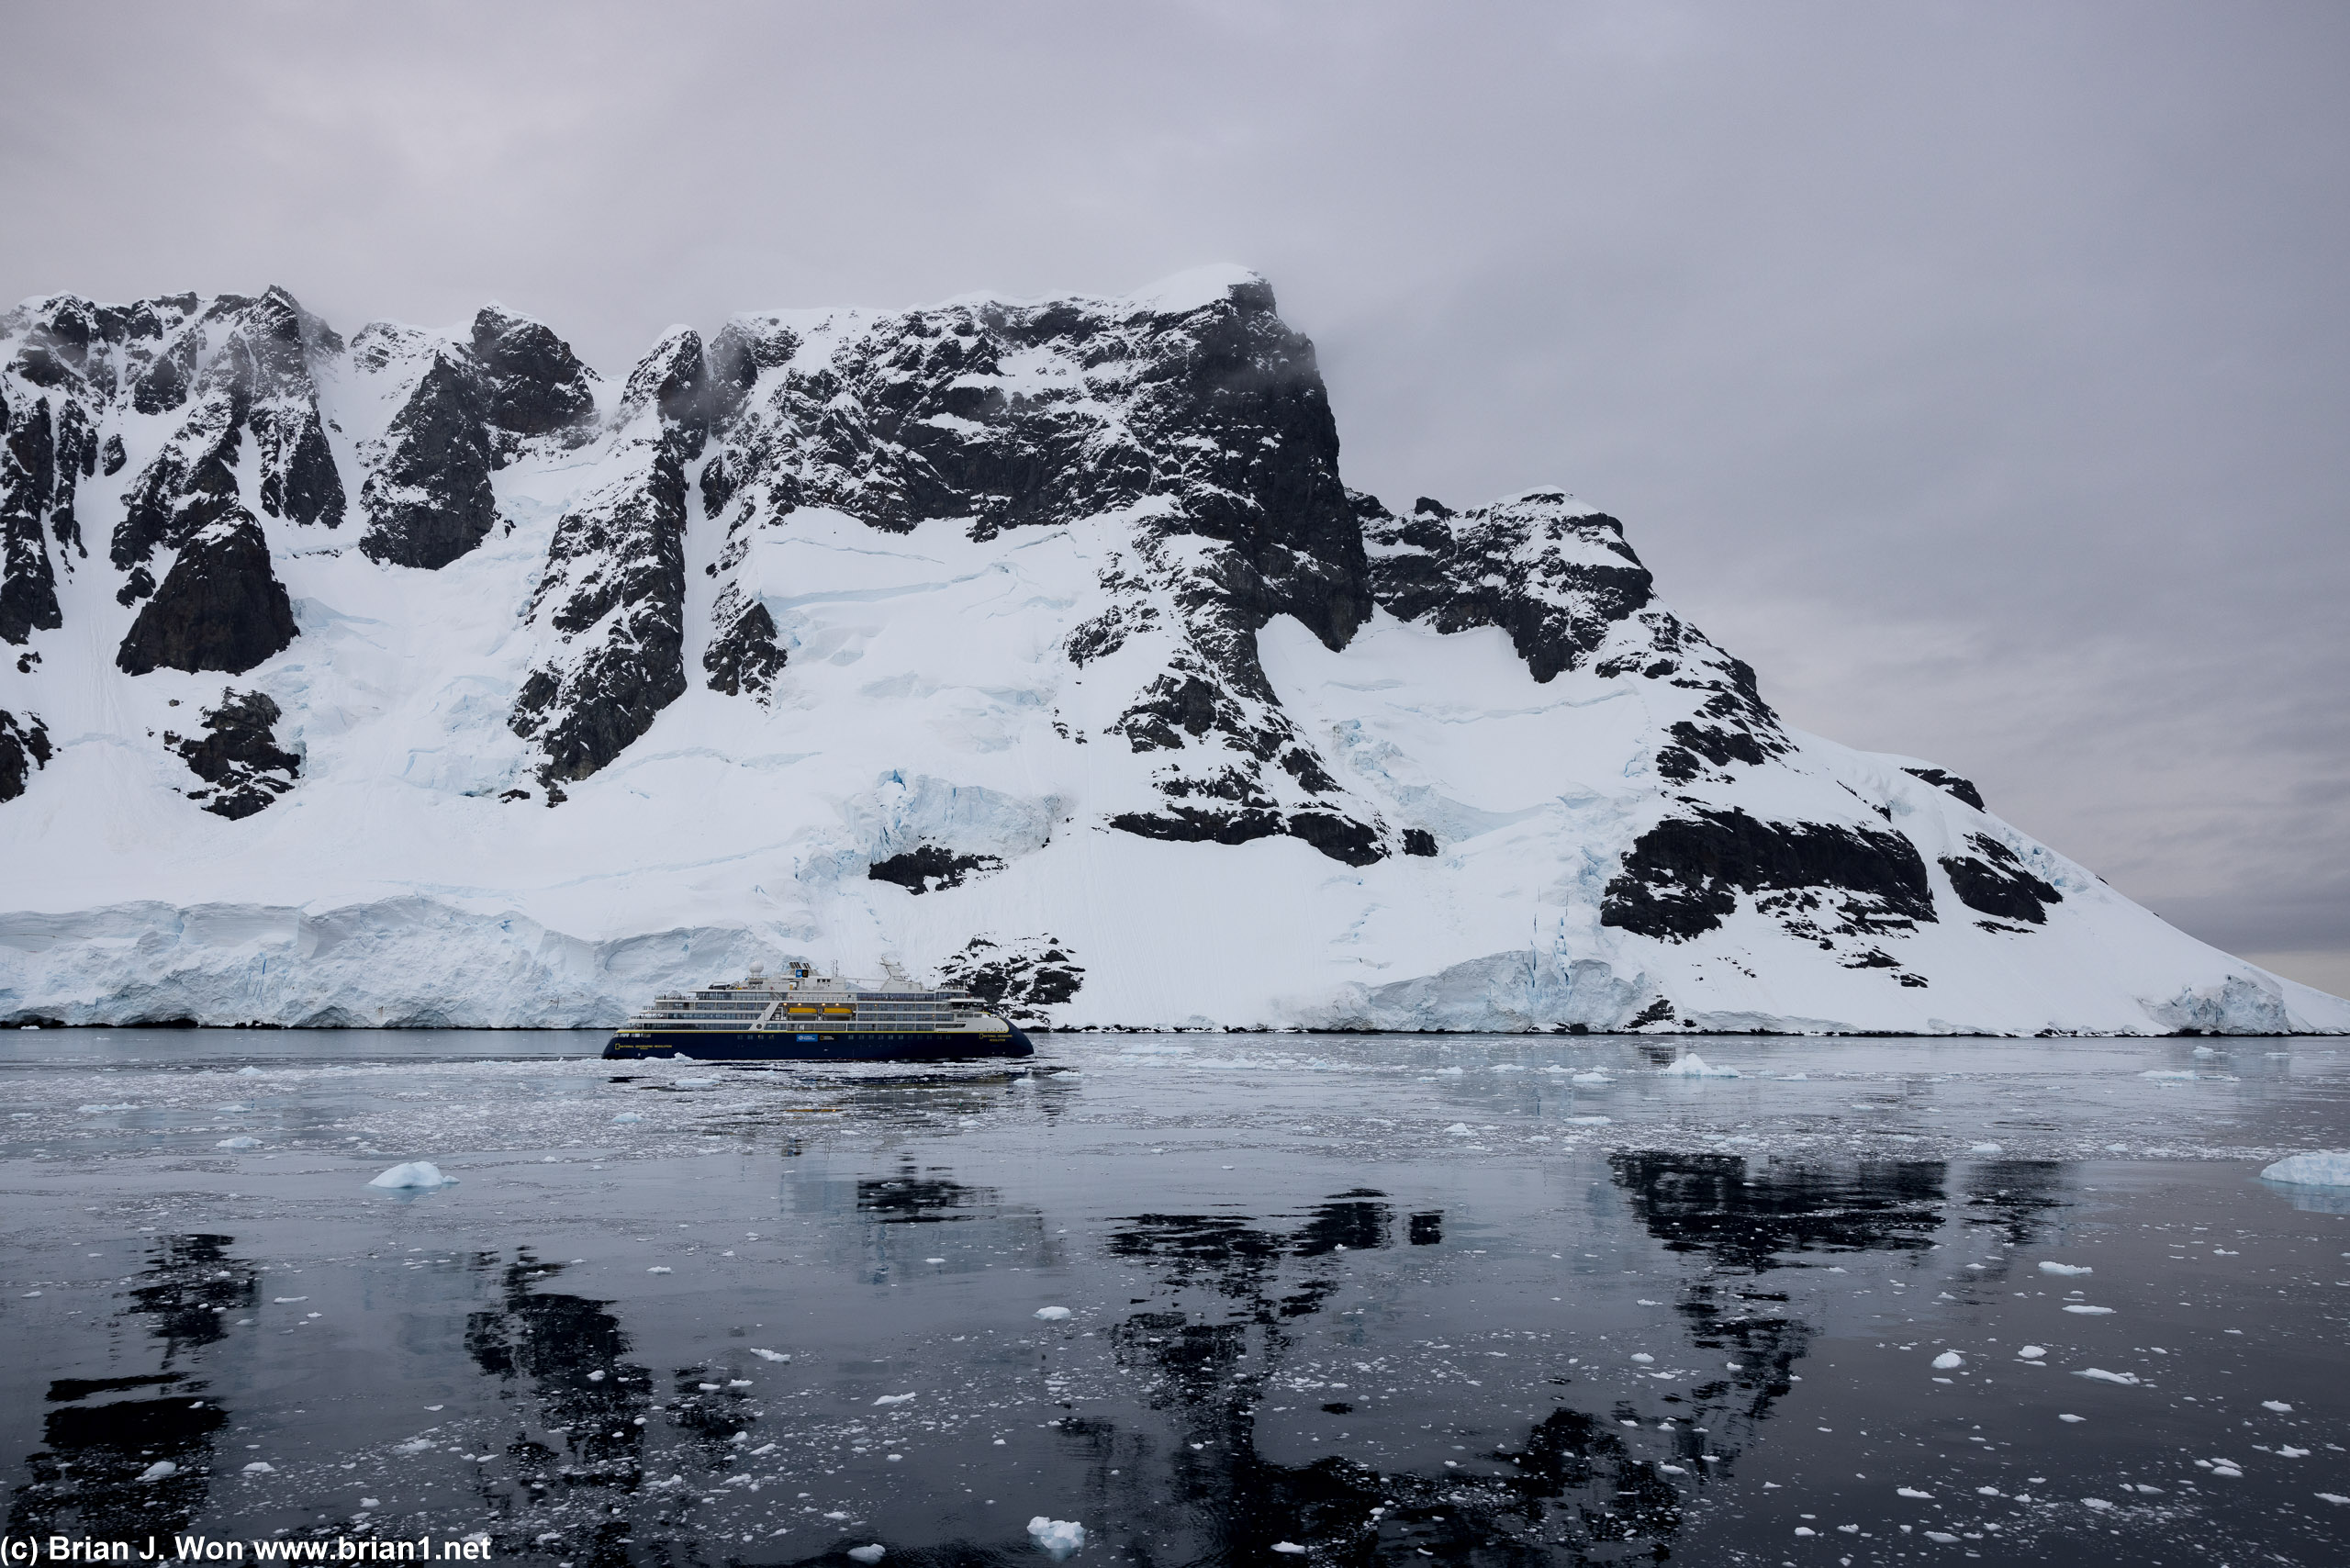 National Geographic Resolution sailing through the icy Lemaire Channel.